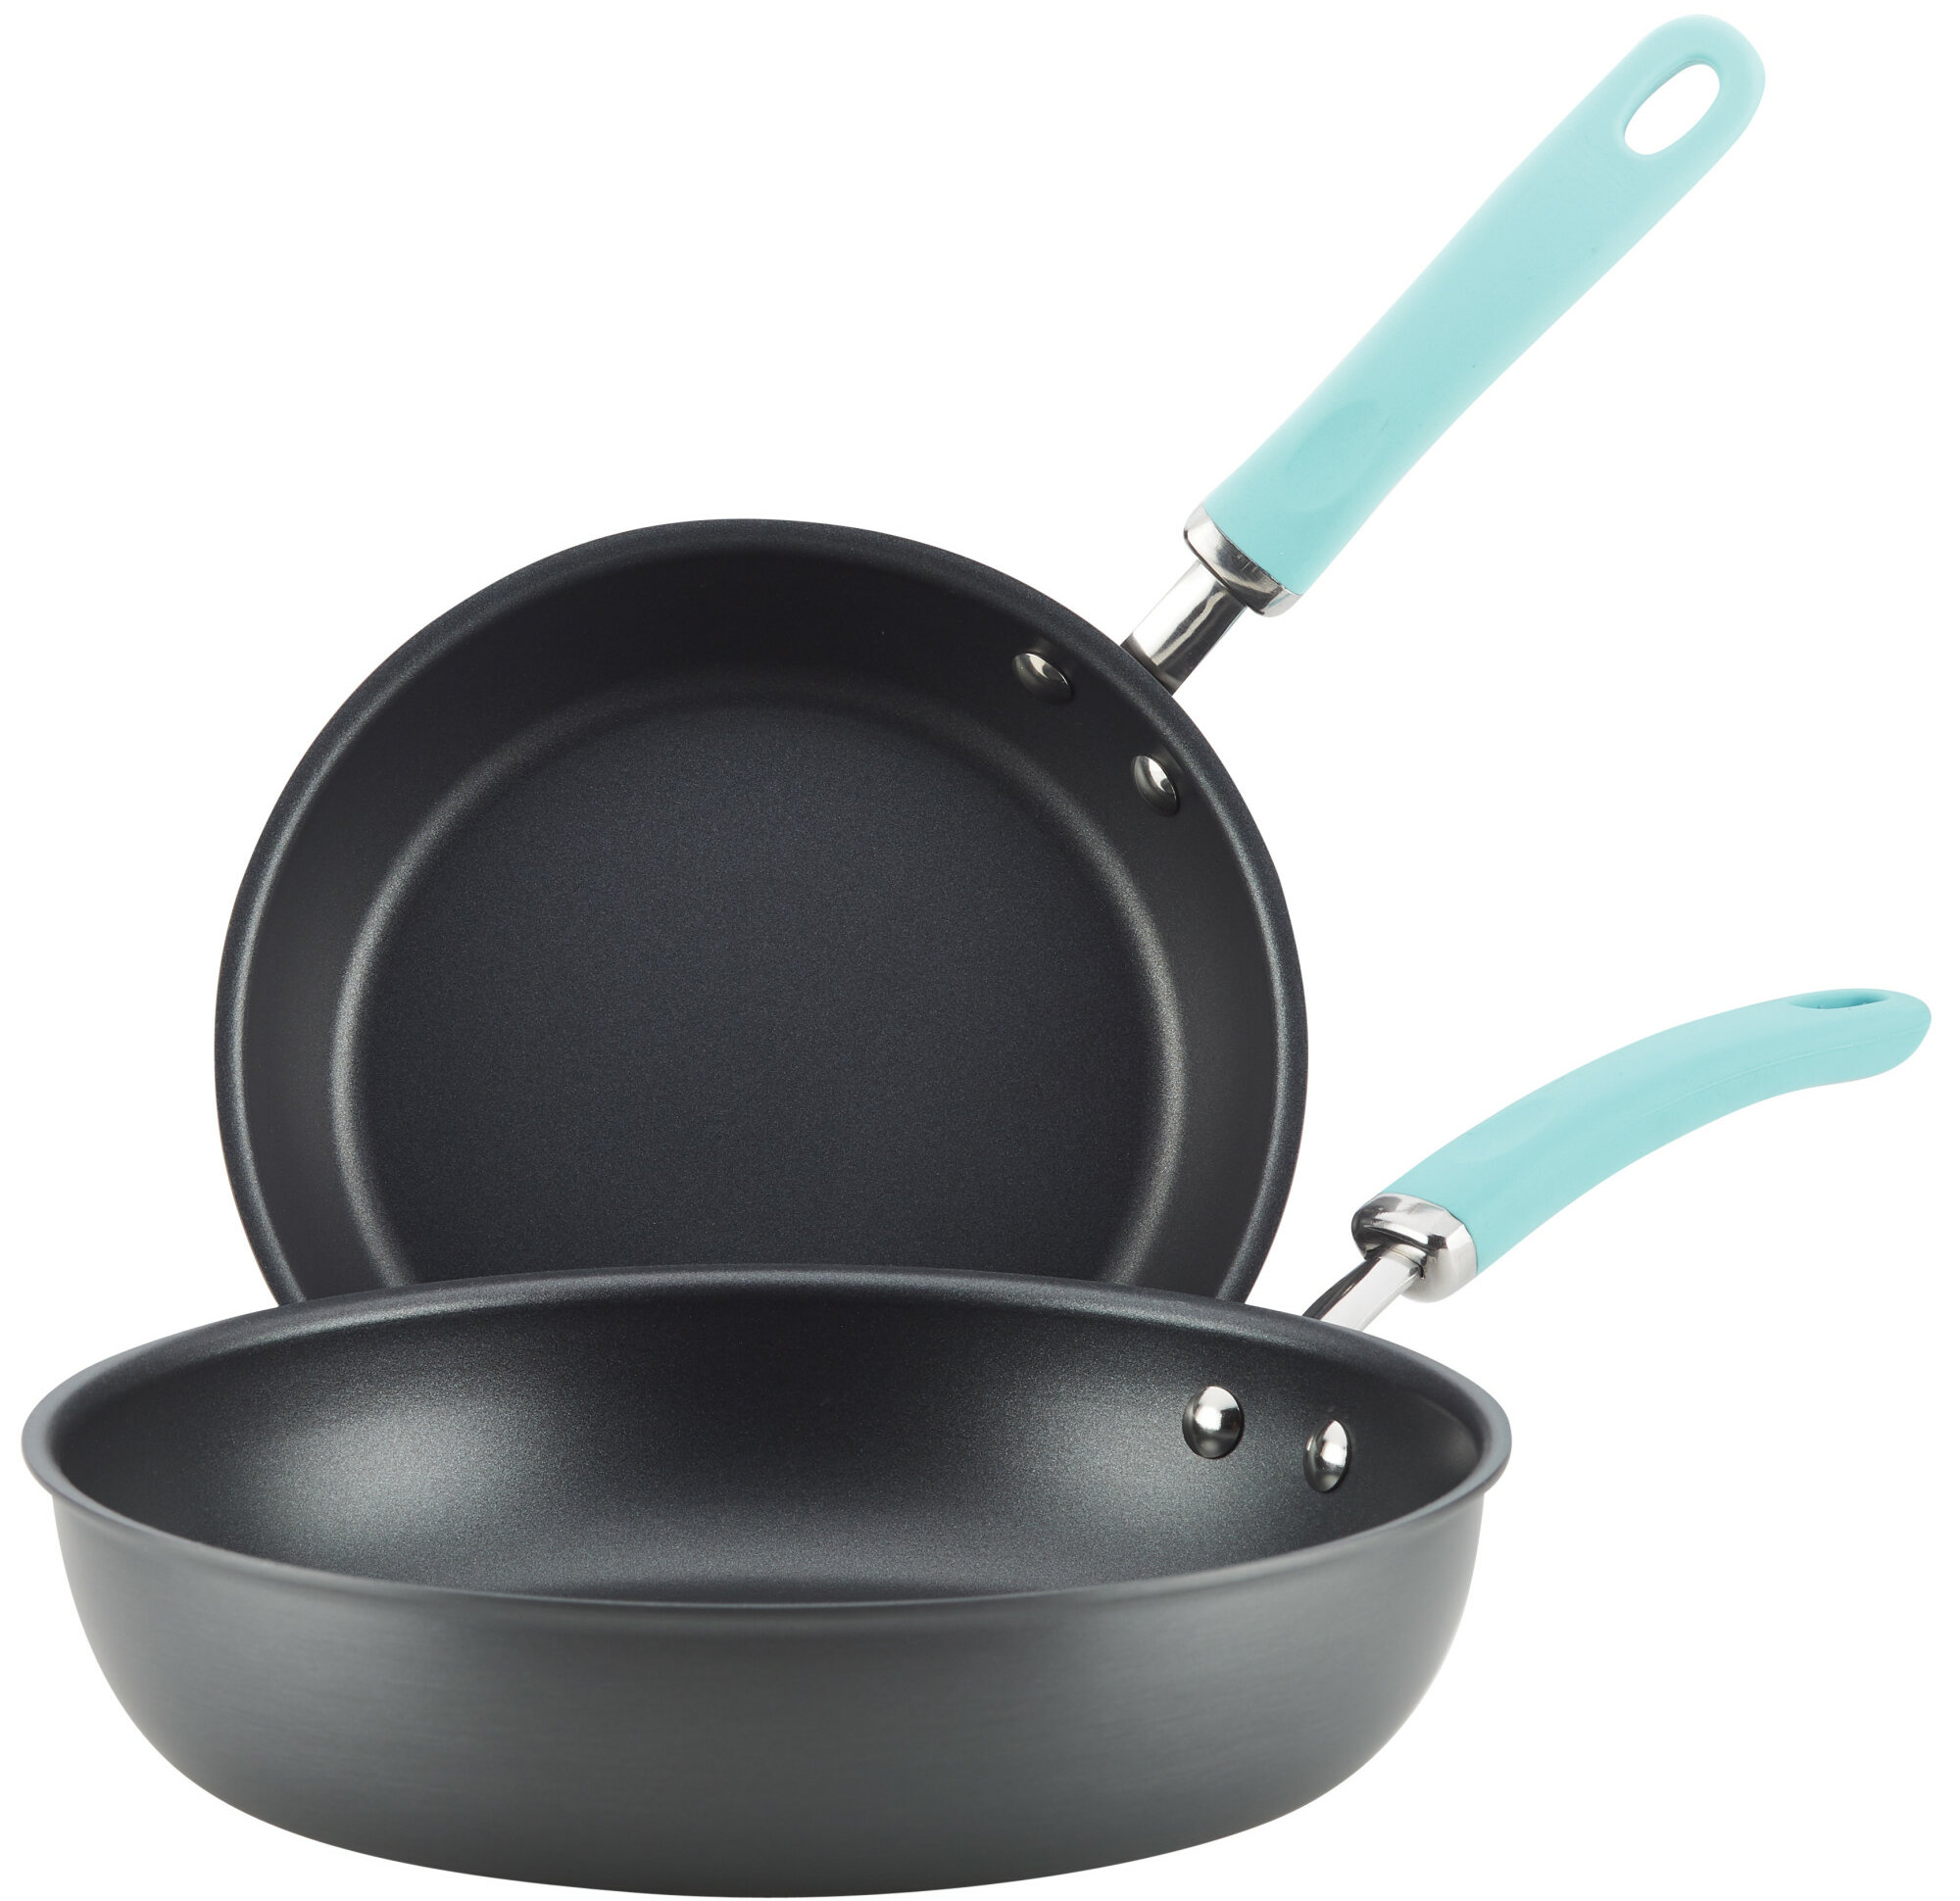 Black Basics Hard Anodized Non-Stick 2-Piece Skillet Set 9.5-Inch and 11-Inch